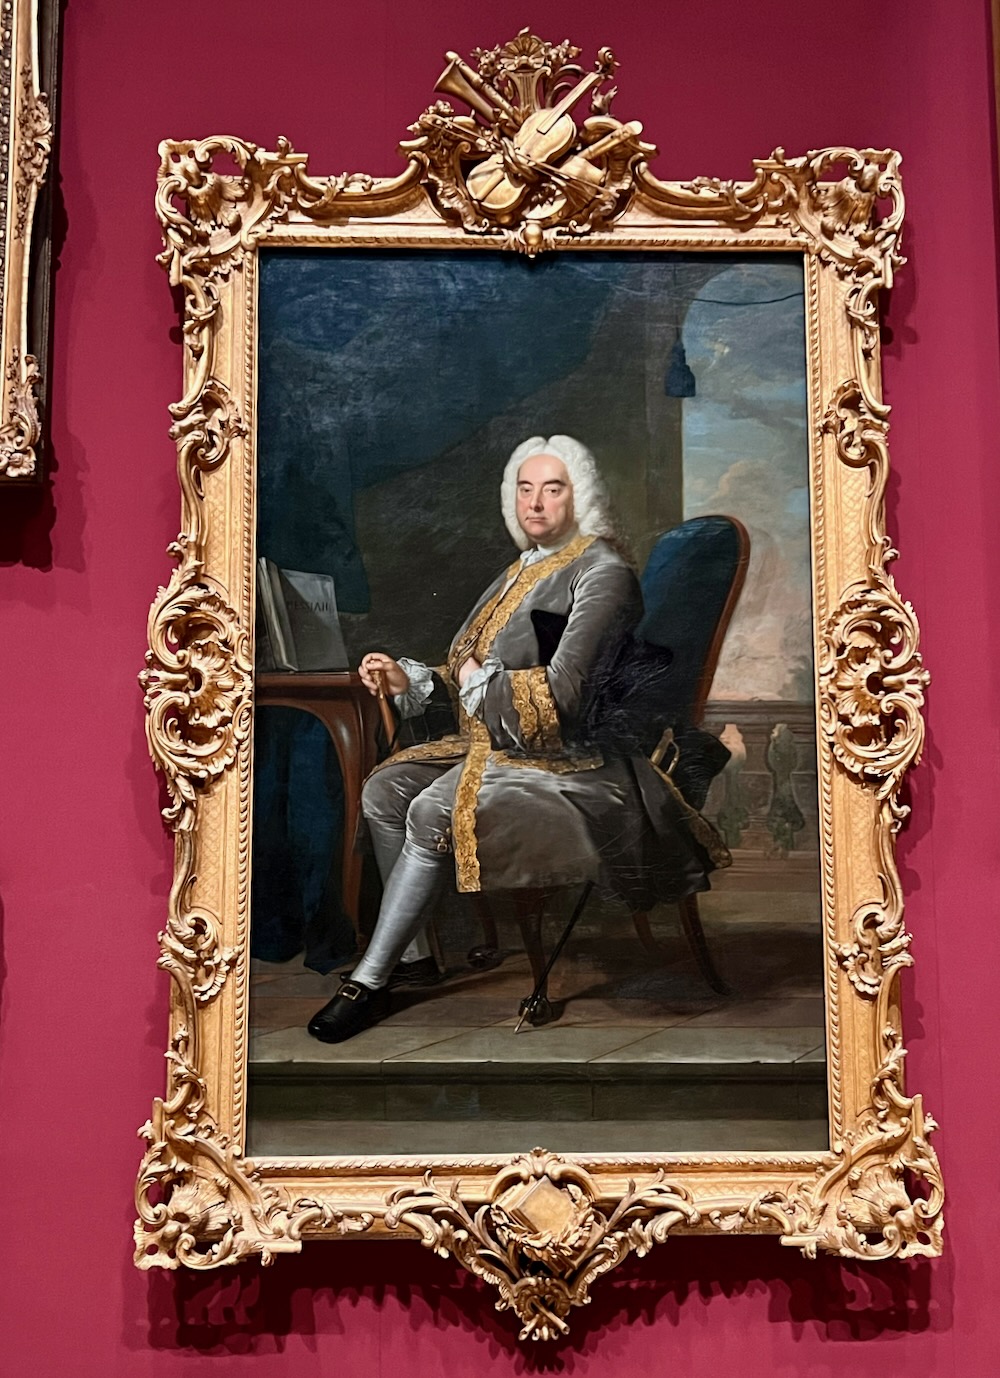 Portrait of George Frideric Handel at The National Portrait Gallery in London. Photo Credit: © Ursula Petula Barzey.